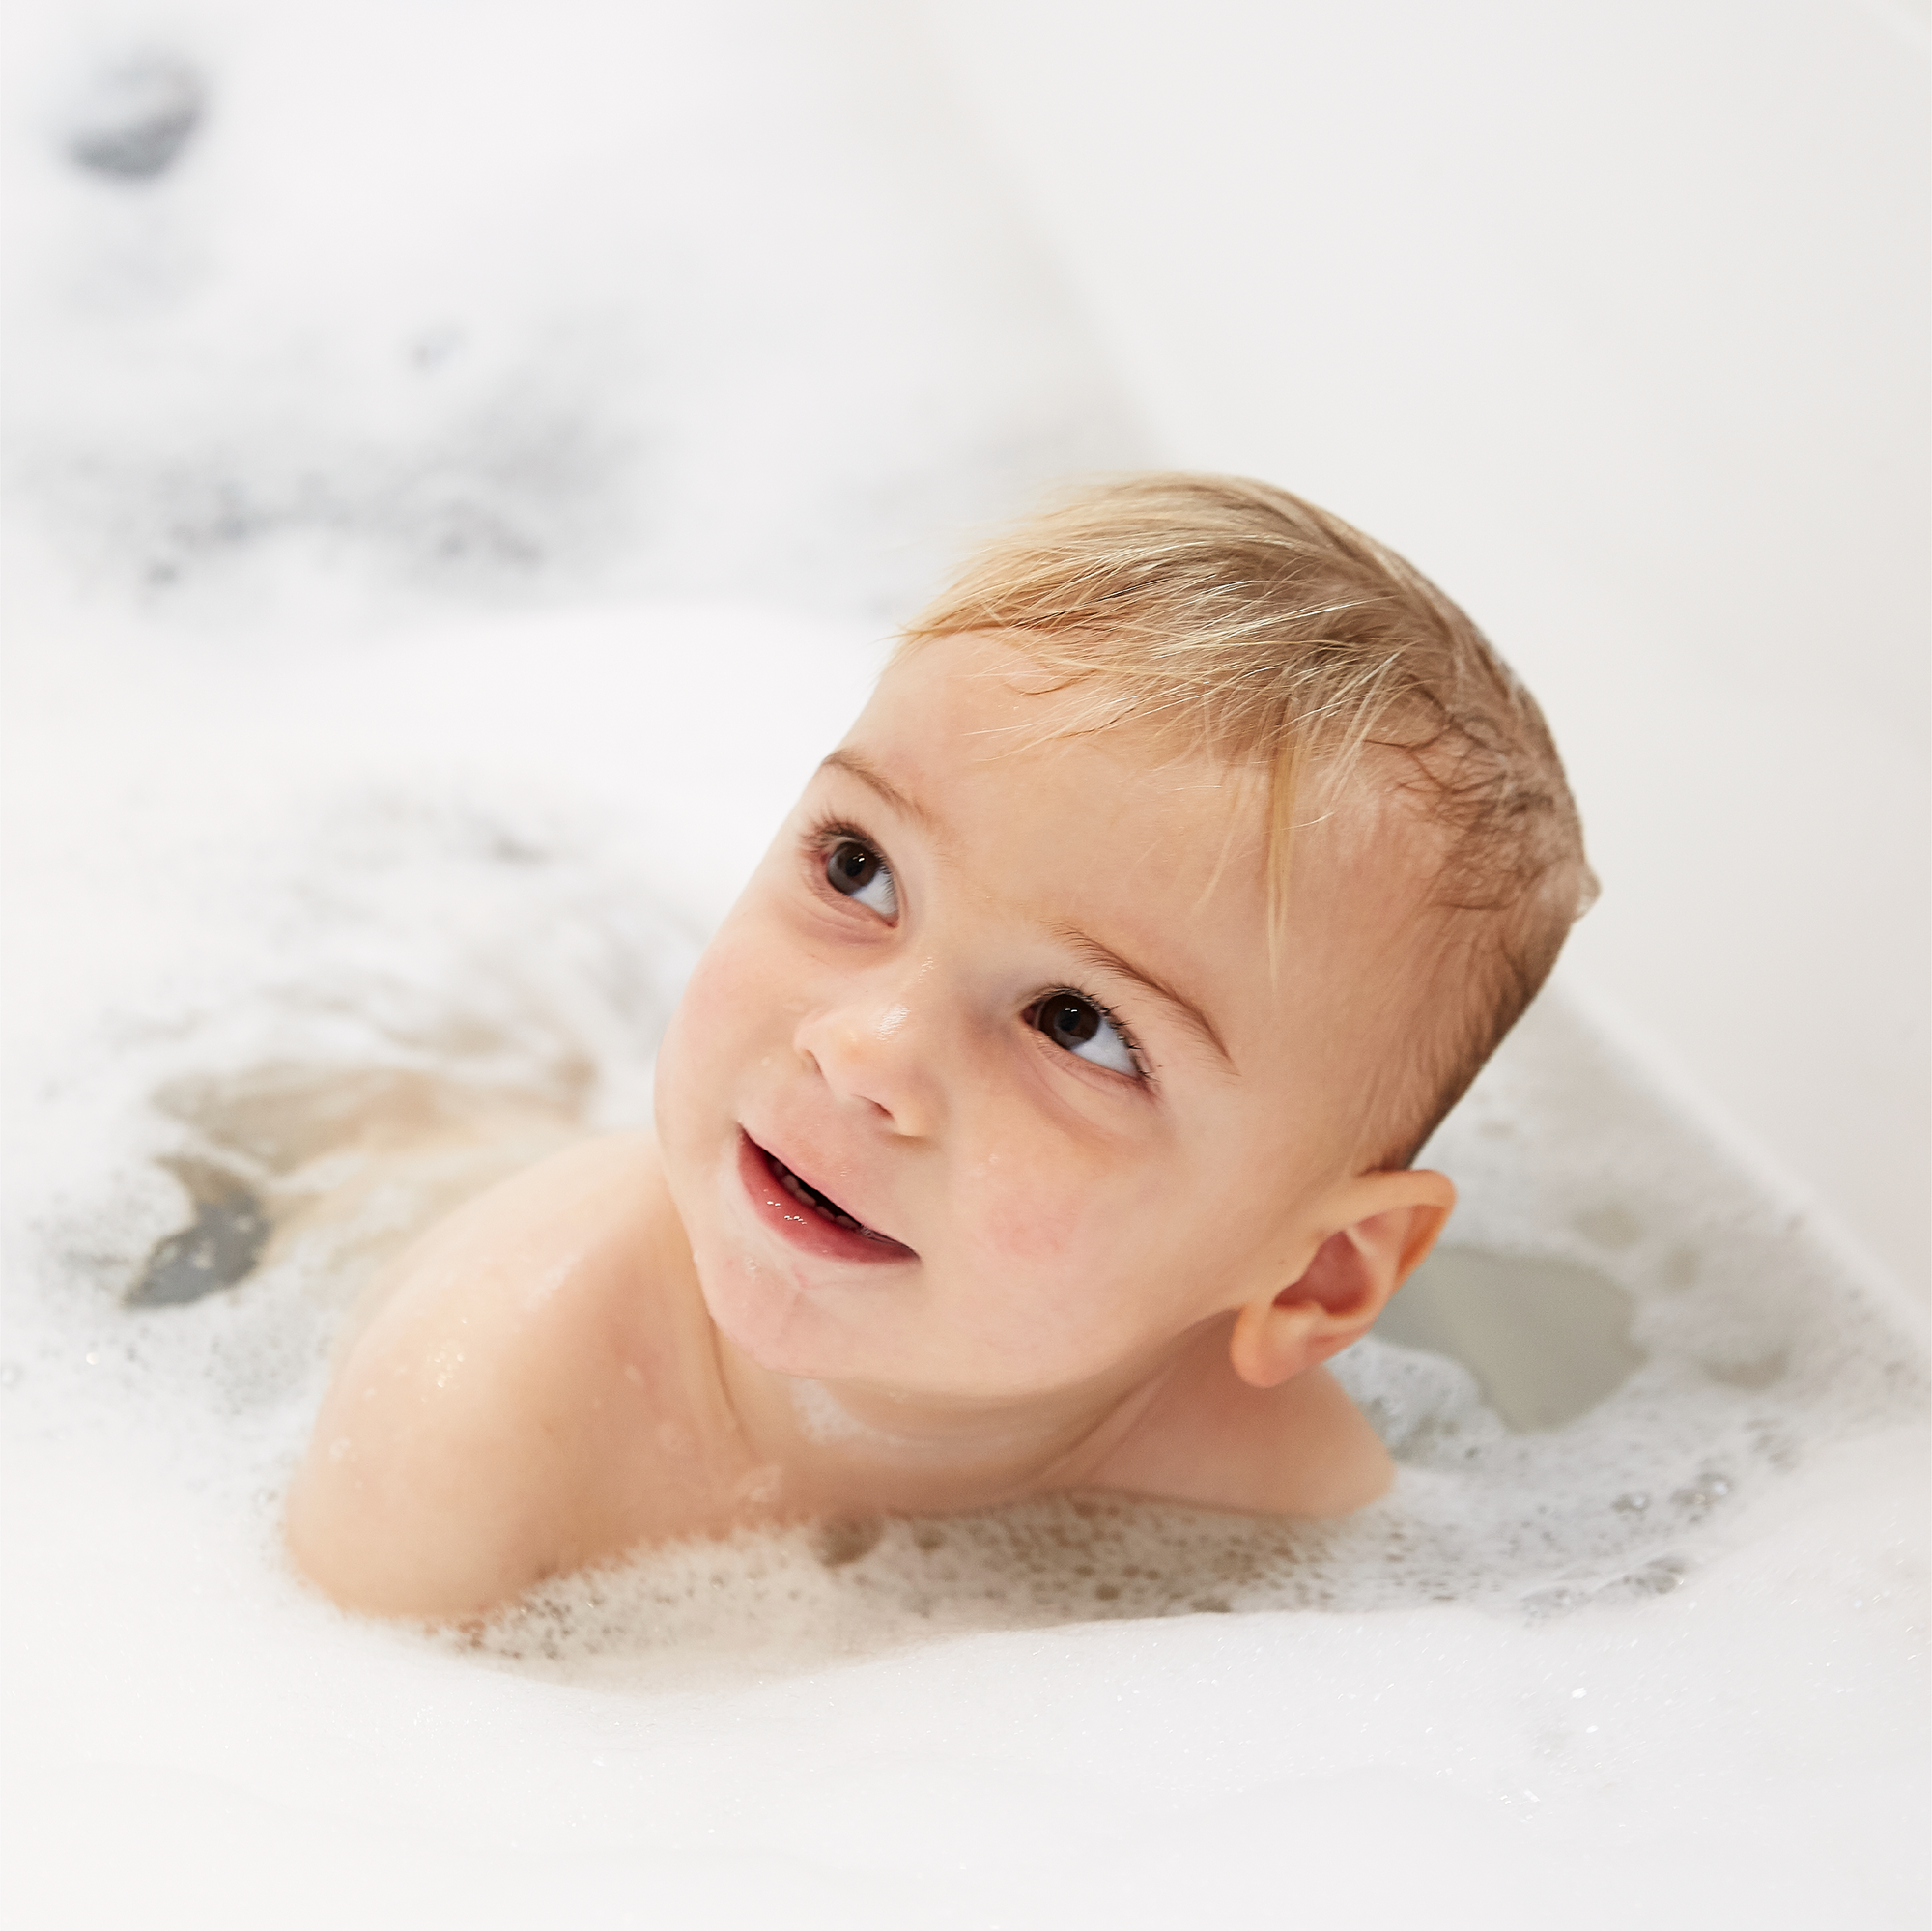 Baby boy in bubble bath after Seven Sundays baby wash product was used to make bubbles